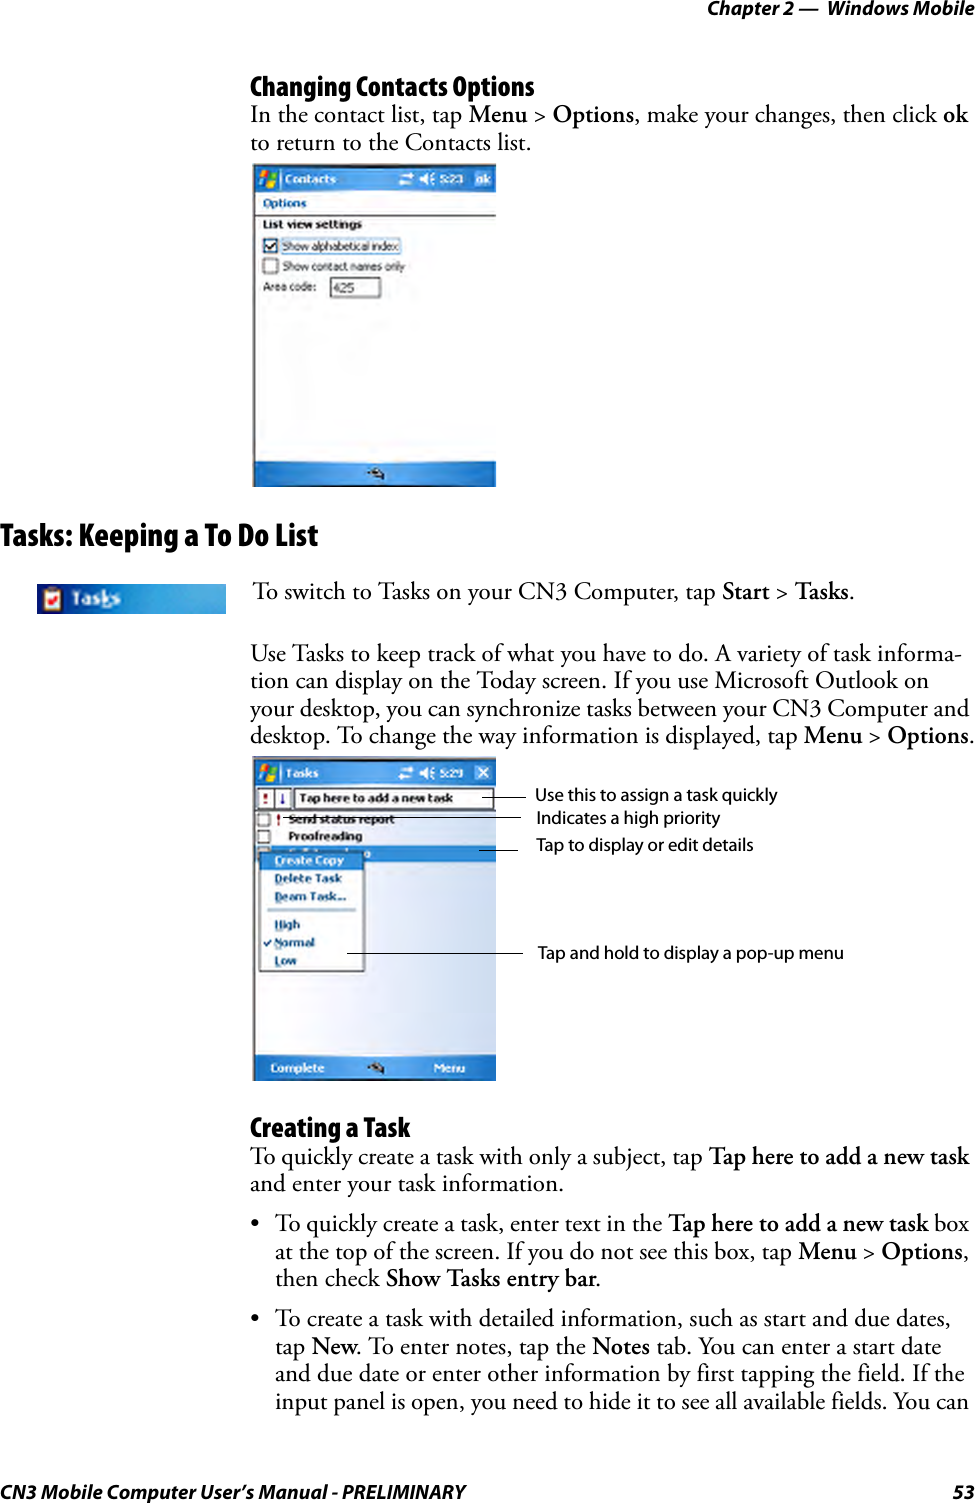 Chapter 2 —  Windows MobileCN3 Mobile Computer User’s Manual - PRELIMINARY 53Changing Contacts OptionsIn the contact list, tap Menu &gt; Options, make your changes, then click ok to return to the Contacts list.Tasks: Keeping a To Do ListUse Tasks to keep track of what you have to do. A variety of task informa-tion can display on the Today screen. If you use Microsoft Outlook on your desktop, you can synchronize tasks between your CN3 Computer and desktop. To change the way information is displayed, tap Menu &gt; Options.Creating a TaskTo quickly create a task with only a subject, tap Tap here to add a new task and enter your task information.• To quickly create a task, enter text in the Tap here to add a new task box at the top of the screen. If you do not see this box, tap Menu &gt; Options, then check Show Tasks entry bar.• To create a task with detailed information, such as start and due dates, tap New. To enter notes, tap the Notes tab. You can enter a start date and due date or enter other information by first tapping the field. If the input panel is open, you need to hide it to see all available fields. You can To switch to Tasks on your CN3 Computer, tap Start &gt; Tas ks.Use this to assign a task quicklyIndicates a high priorityTap to display or edit detailsTap and hold to display a pop-up menu